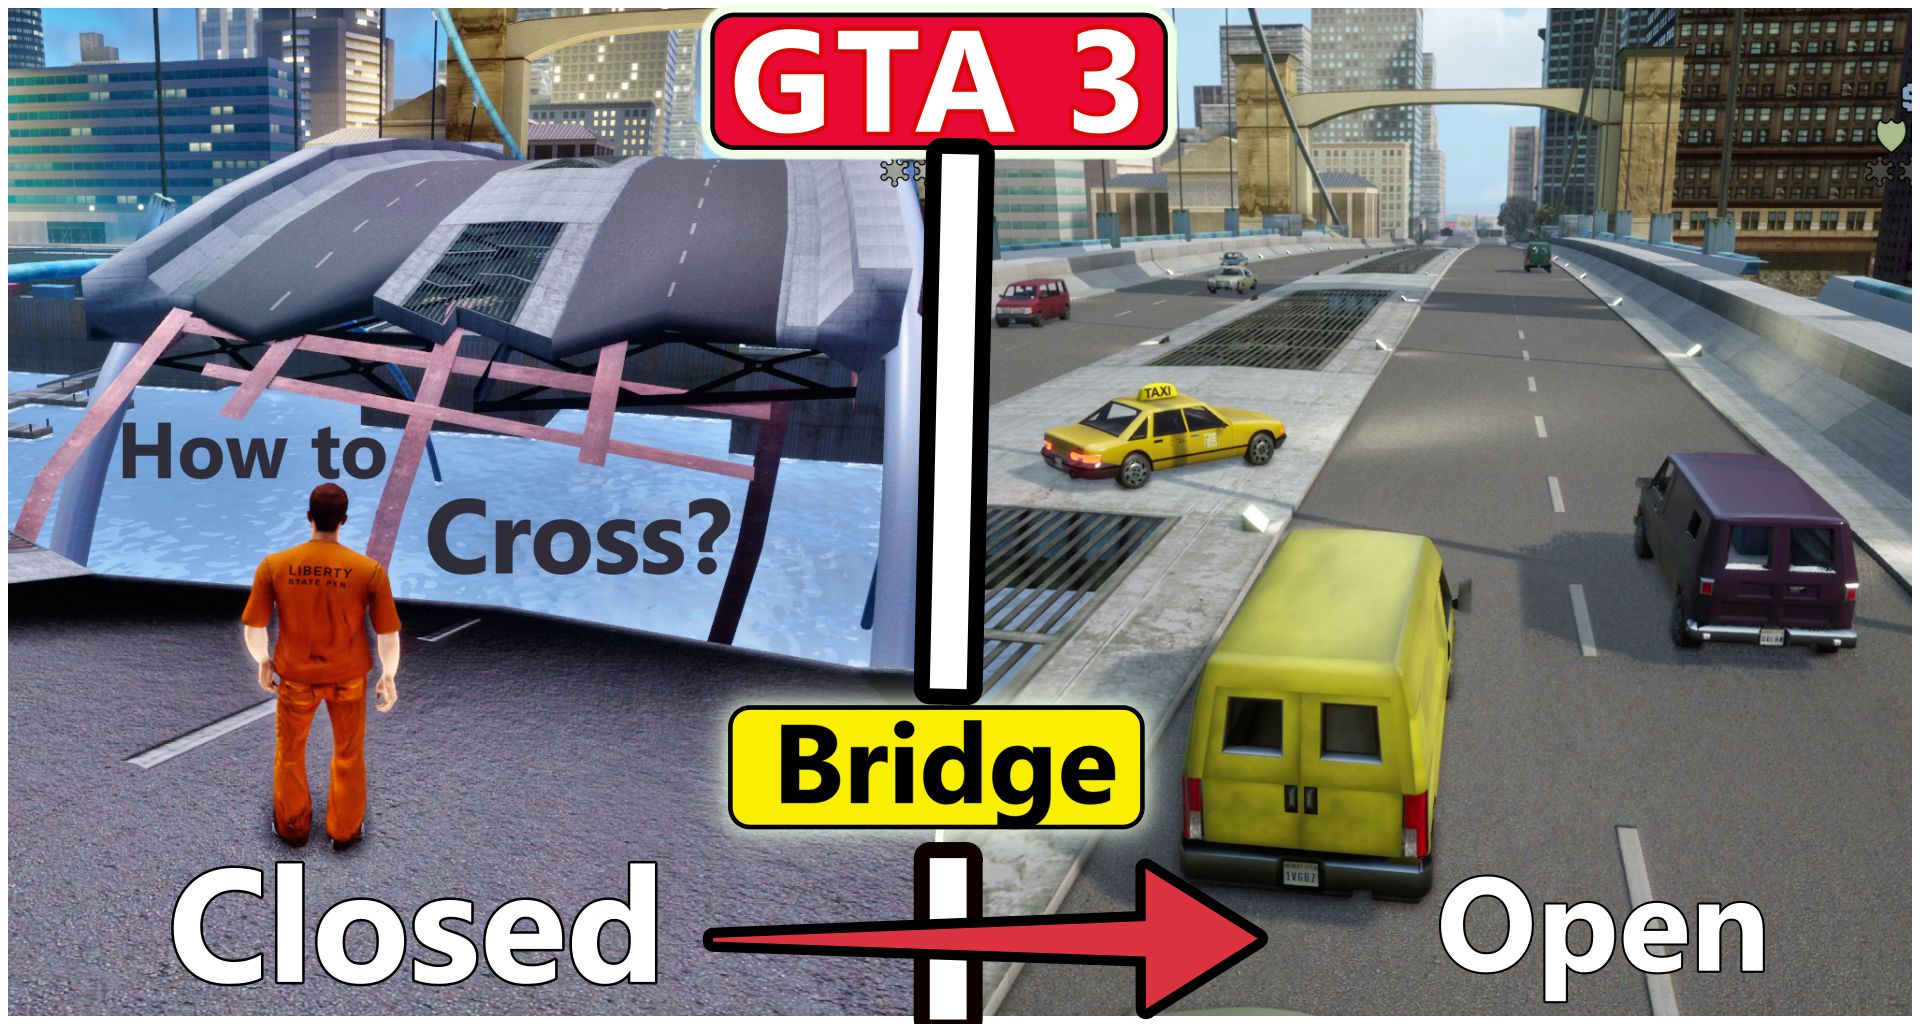 How to cross/open closed bridge of GTA 3 for Exploring all island